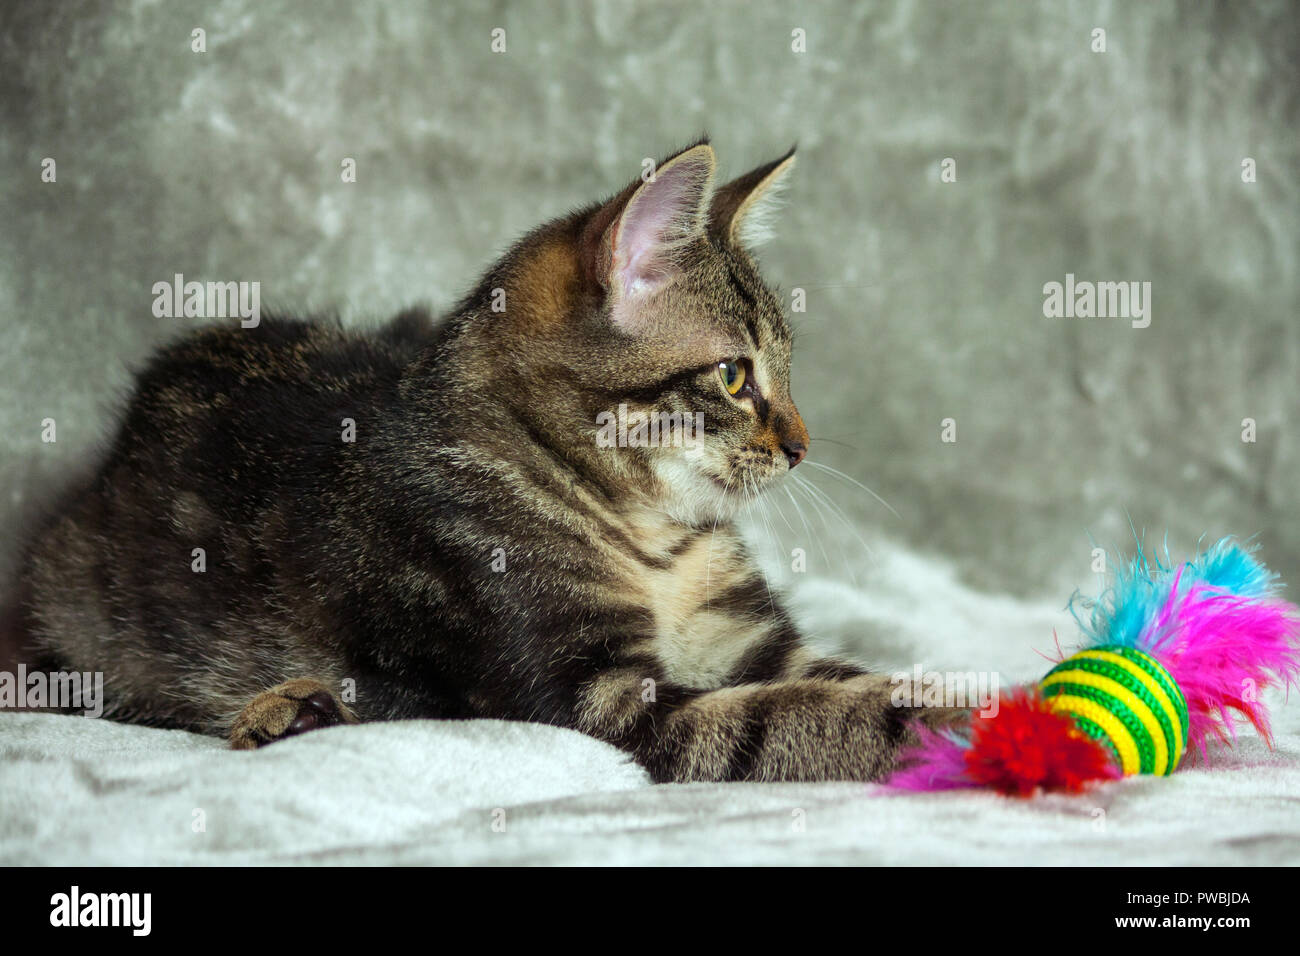 unbreed kitten lying on a gray rug, looking to the side, next to it is a bright toy with pink feathers, in the background a luminous gray tint, Stock Photo